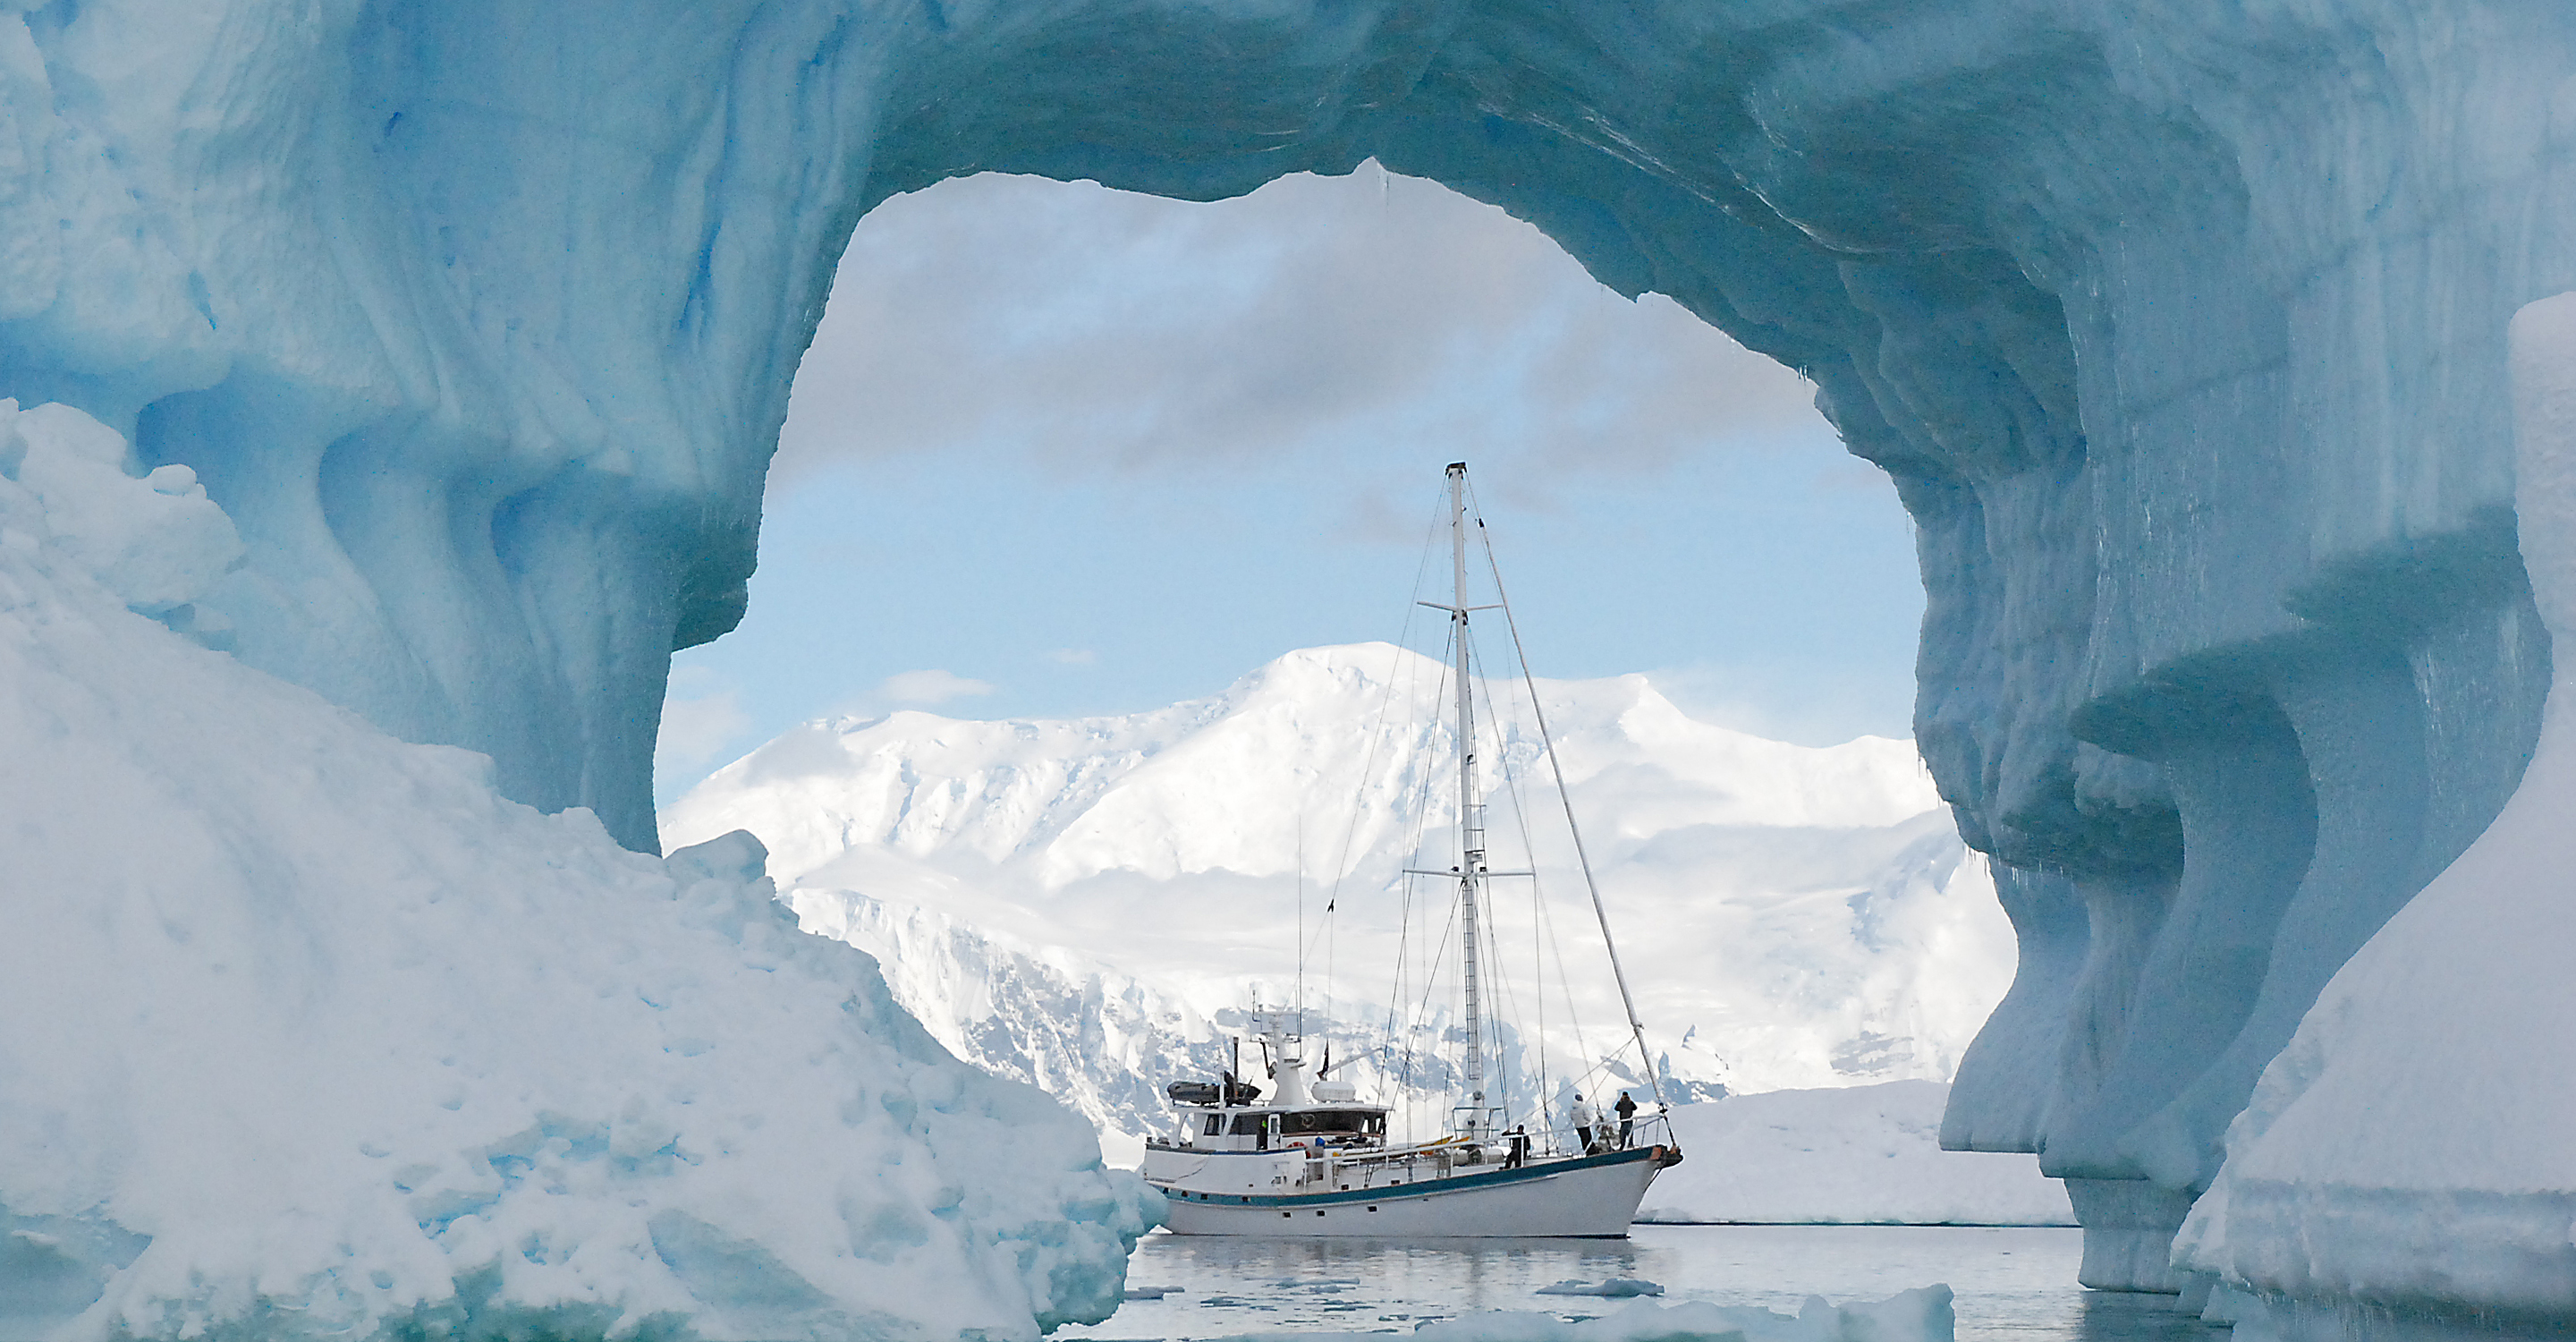 A view of the S/V Australis through an arched iceberg, Antarctica